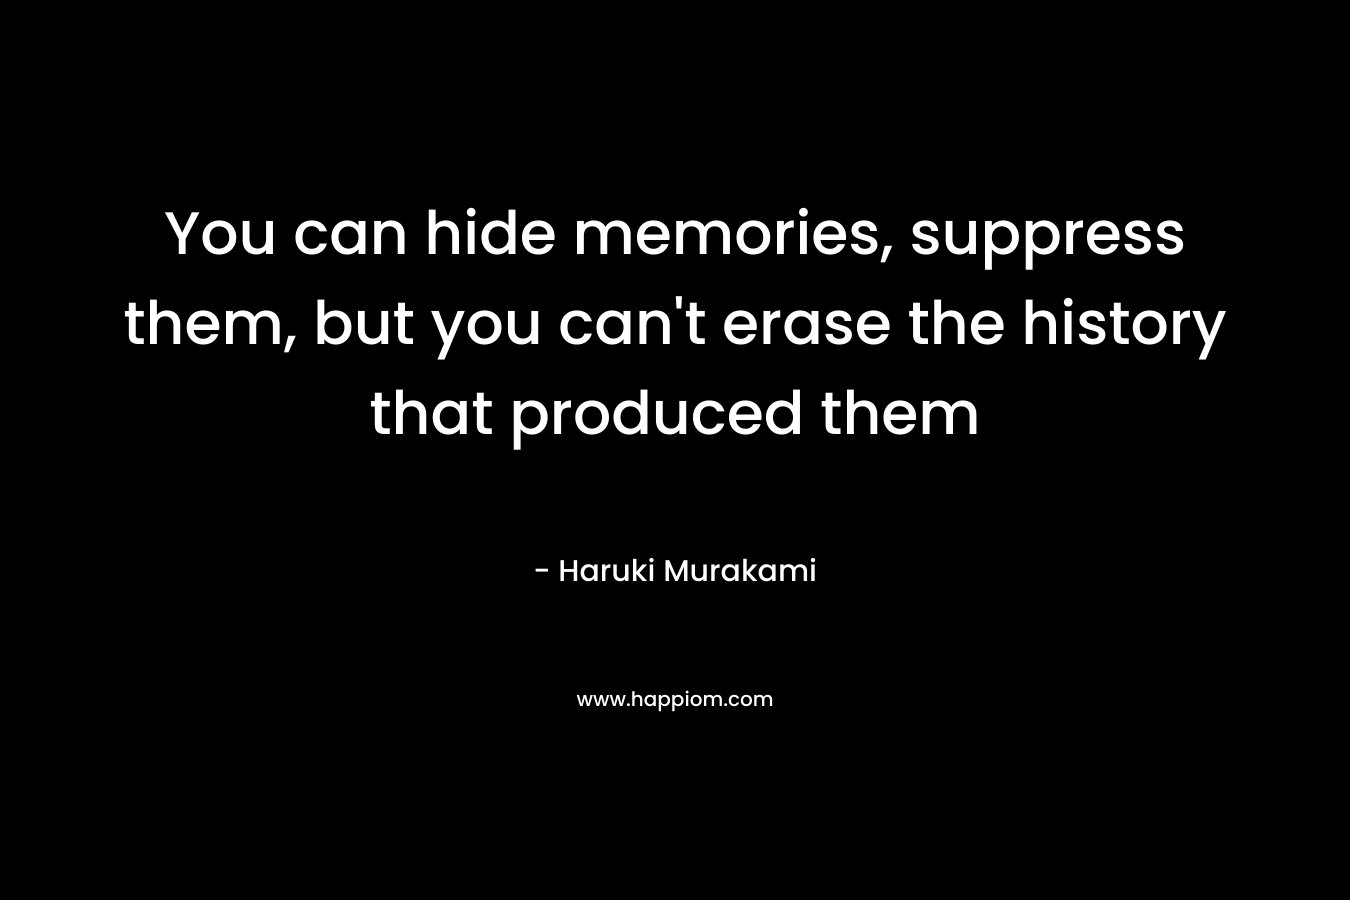 You can hide memories, suppress them, but you can't erase the history that produced them